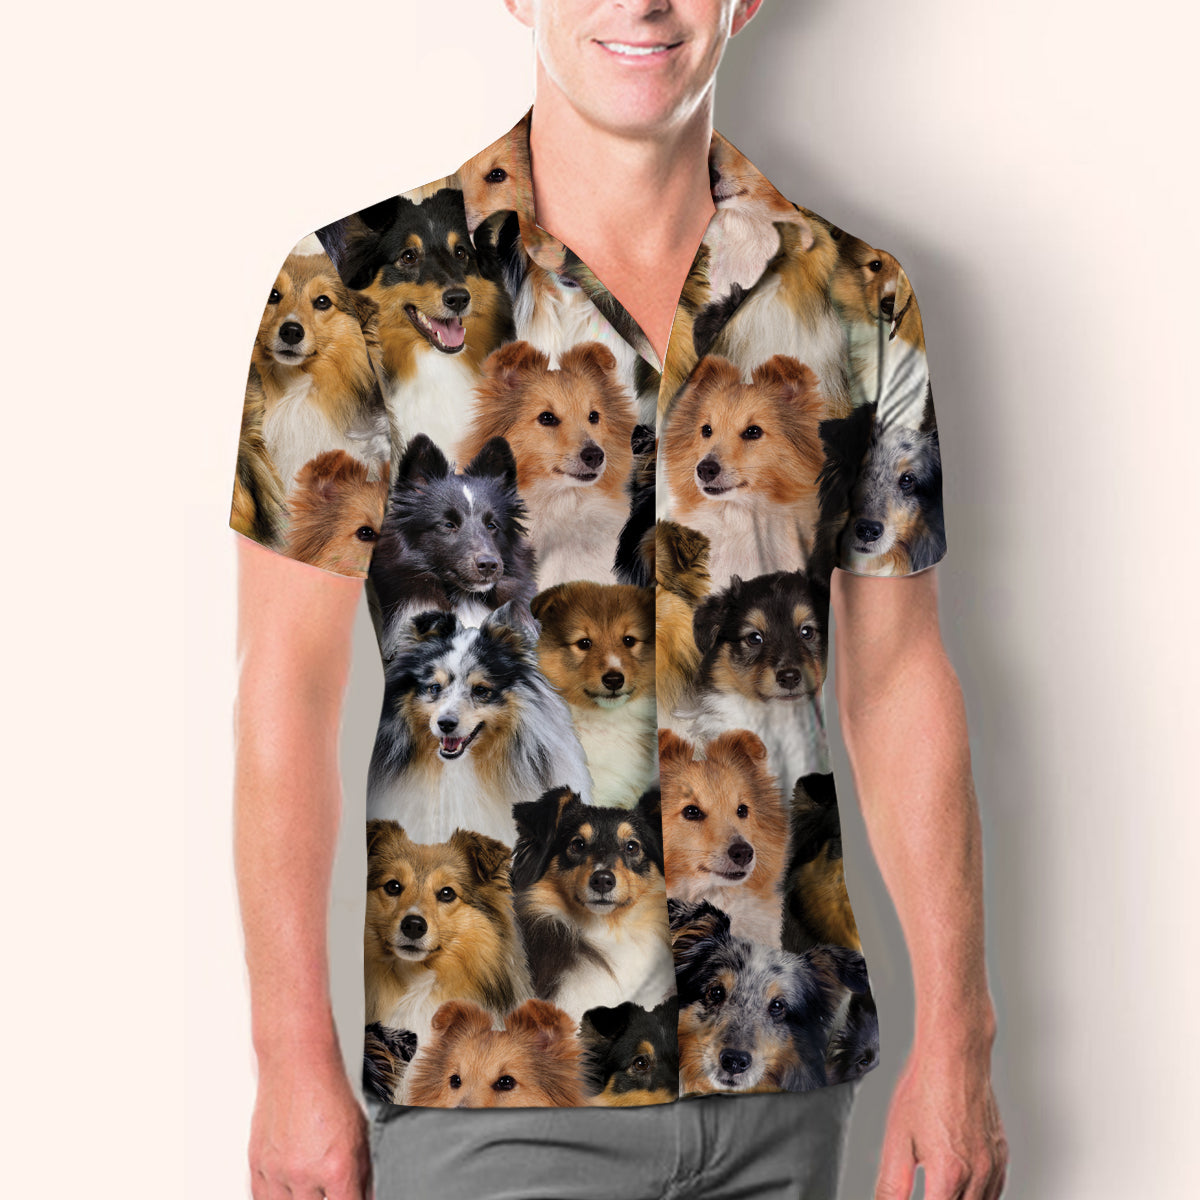 You Will Have A Bunch Of Shetland Sheepdogs - Shirt V1